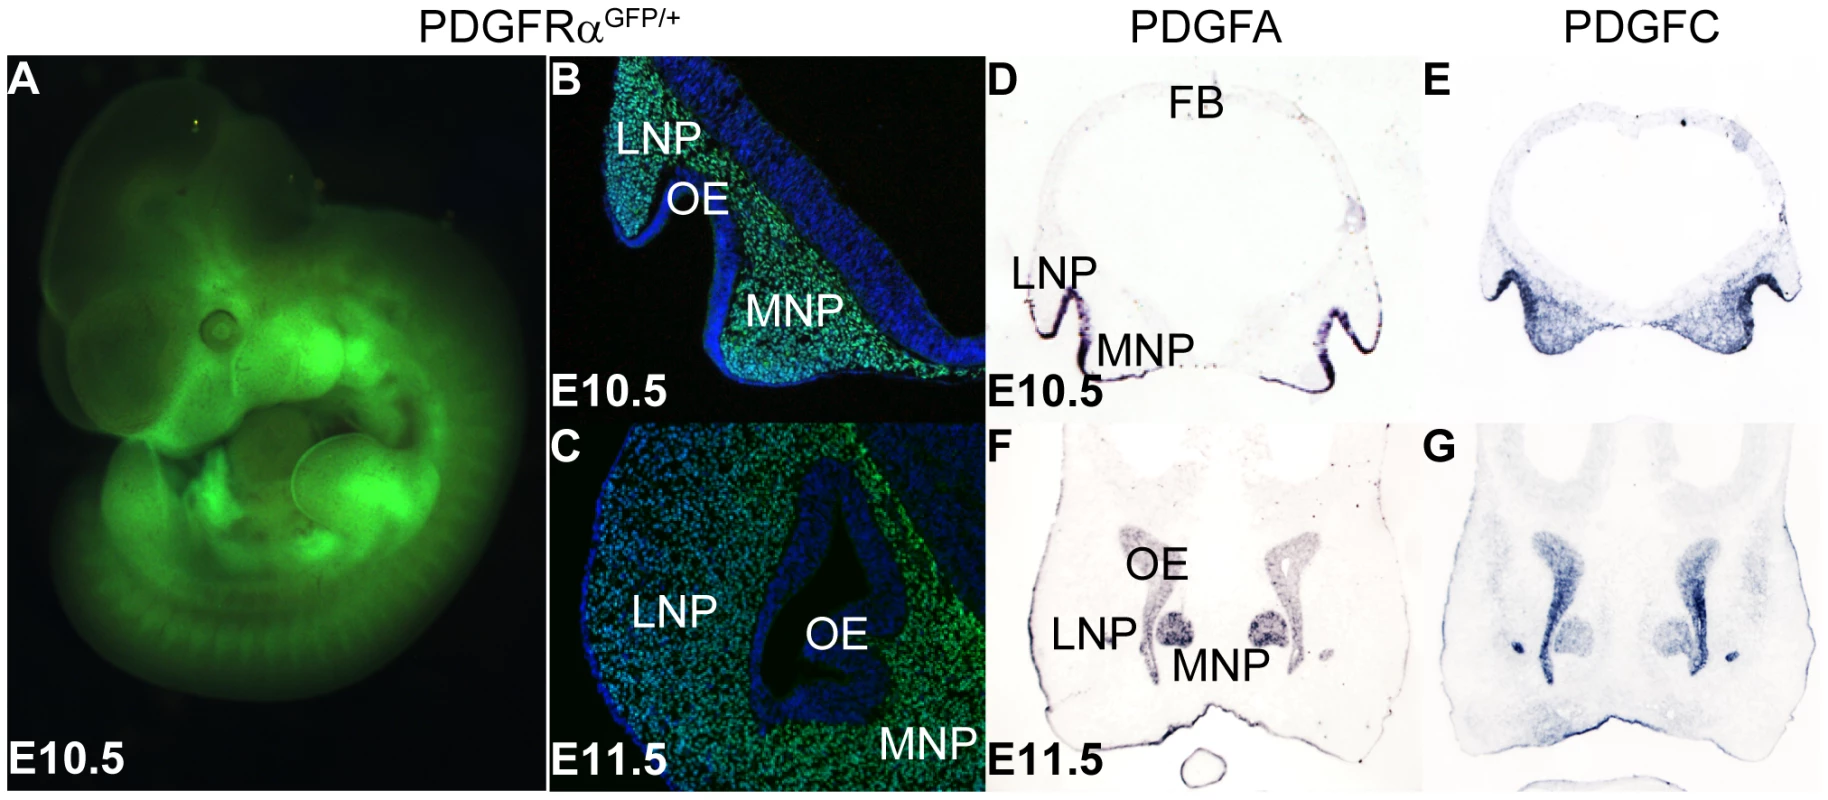 PDGFRα and its ligands PDGFA and PDGFC are expressed during midface development.